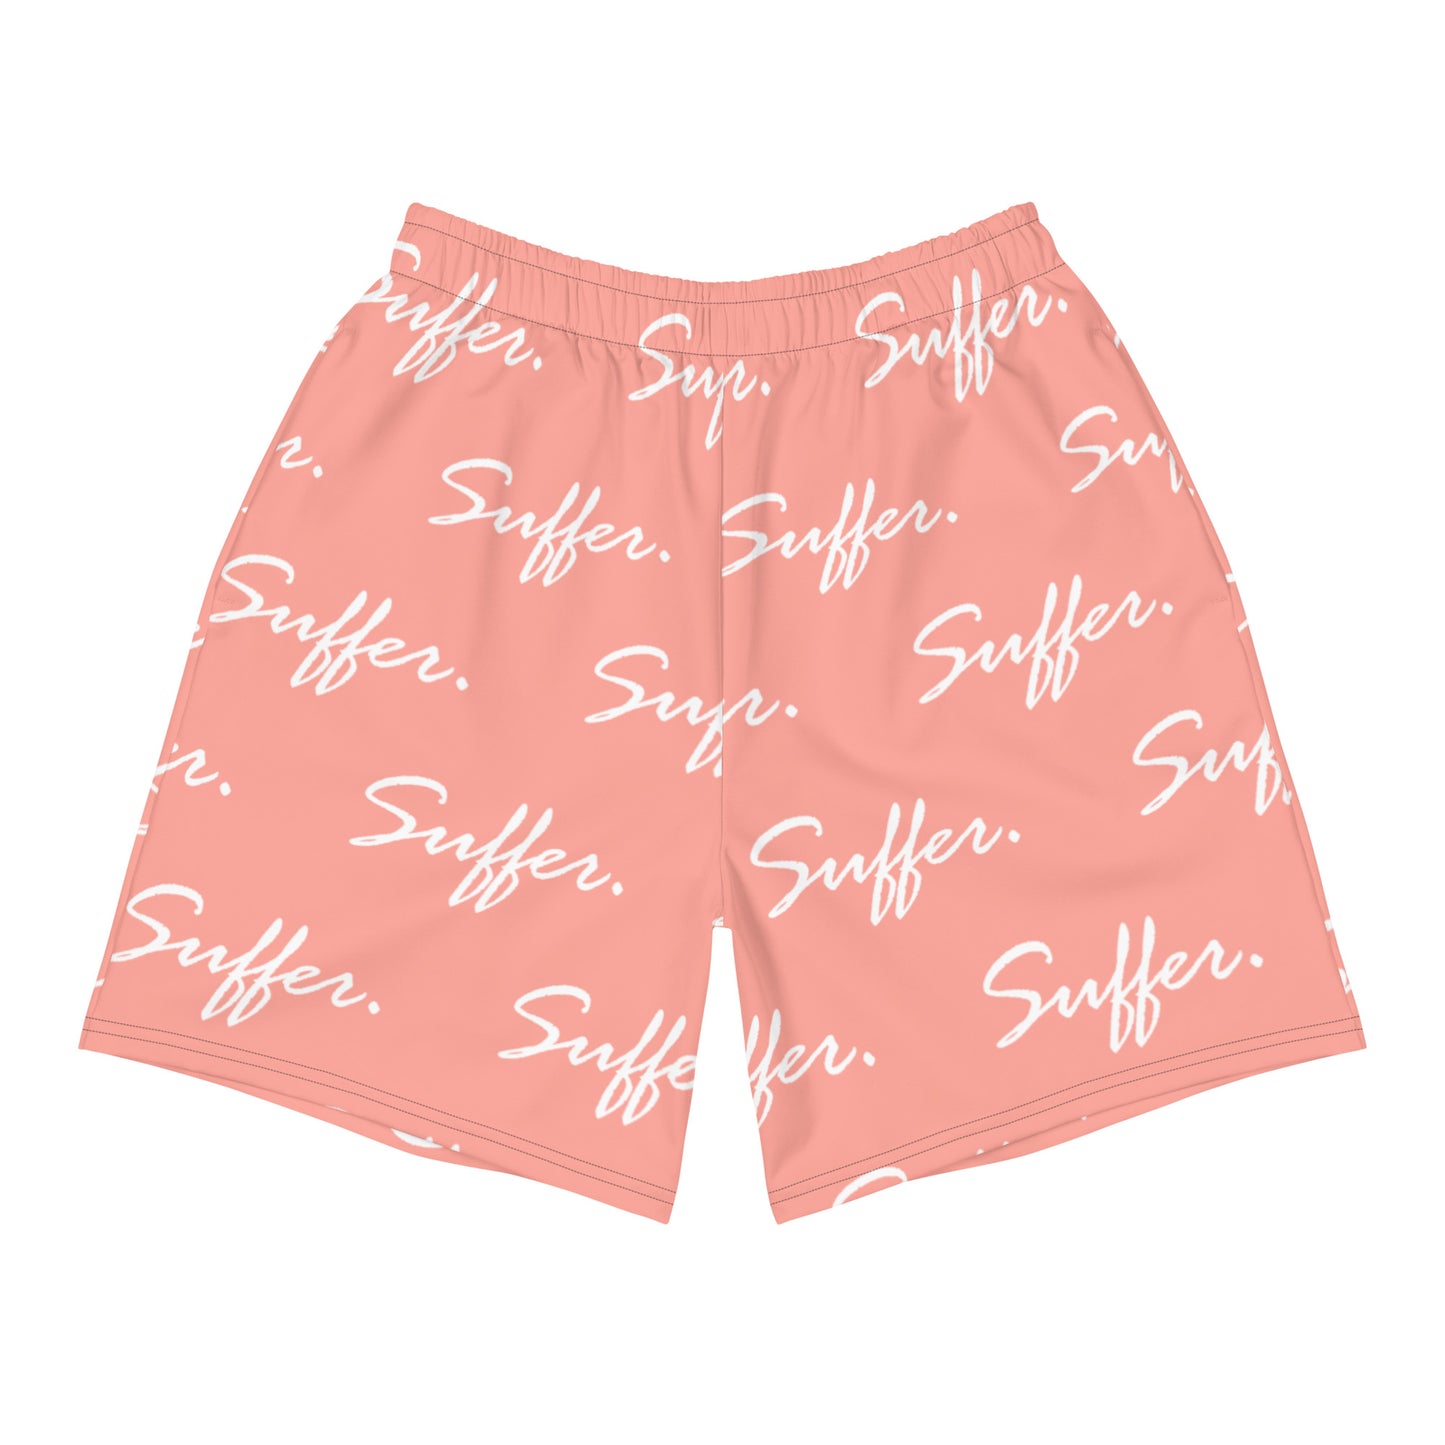 Dusty Rose Suffer SigPat Athletic Shorts